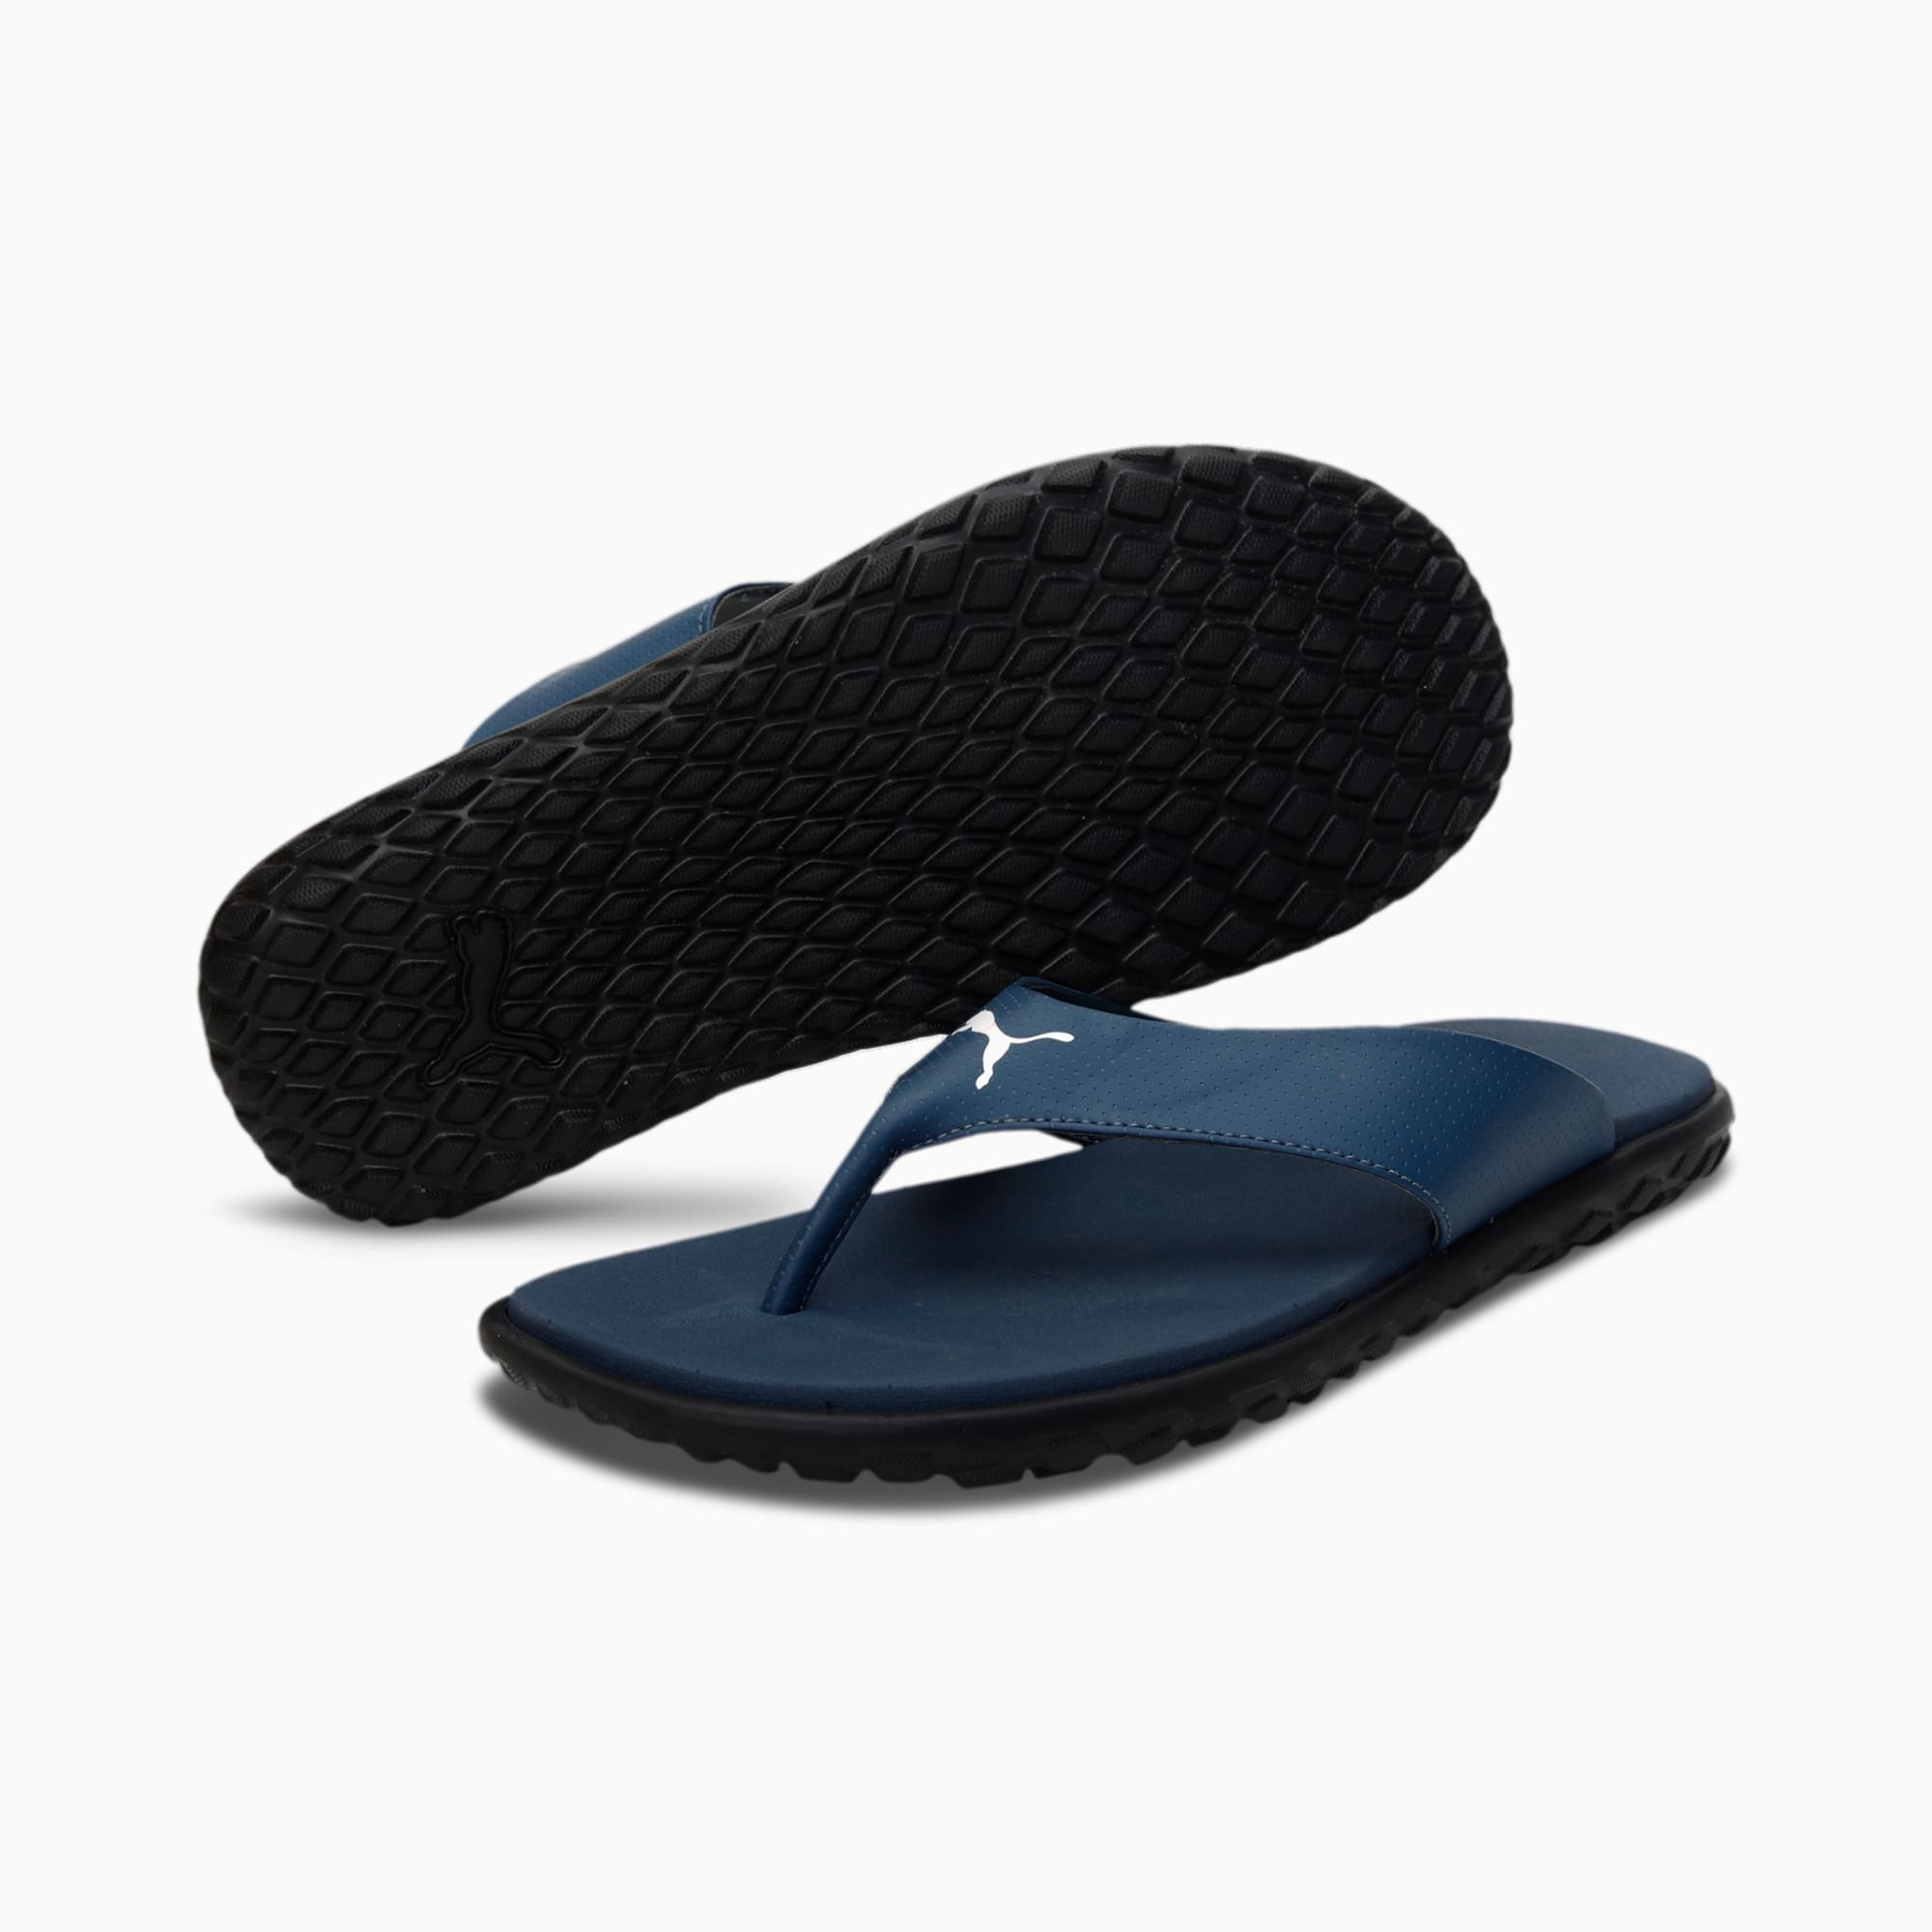 adidas slippers in snapdeal